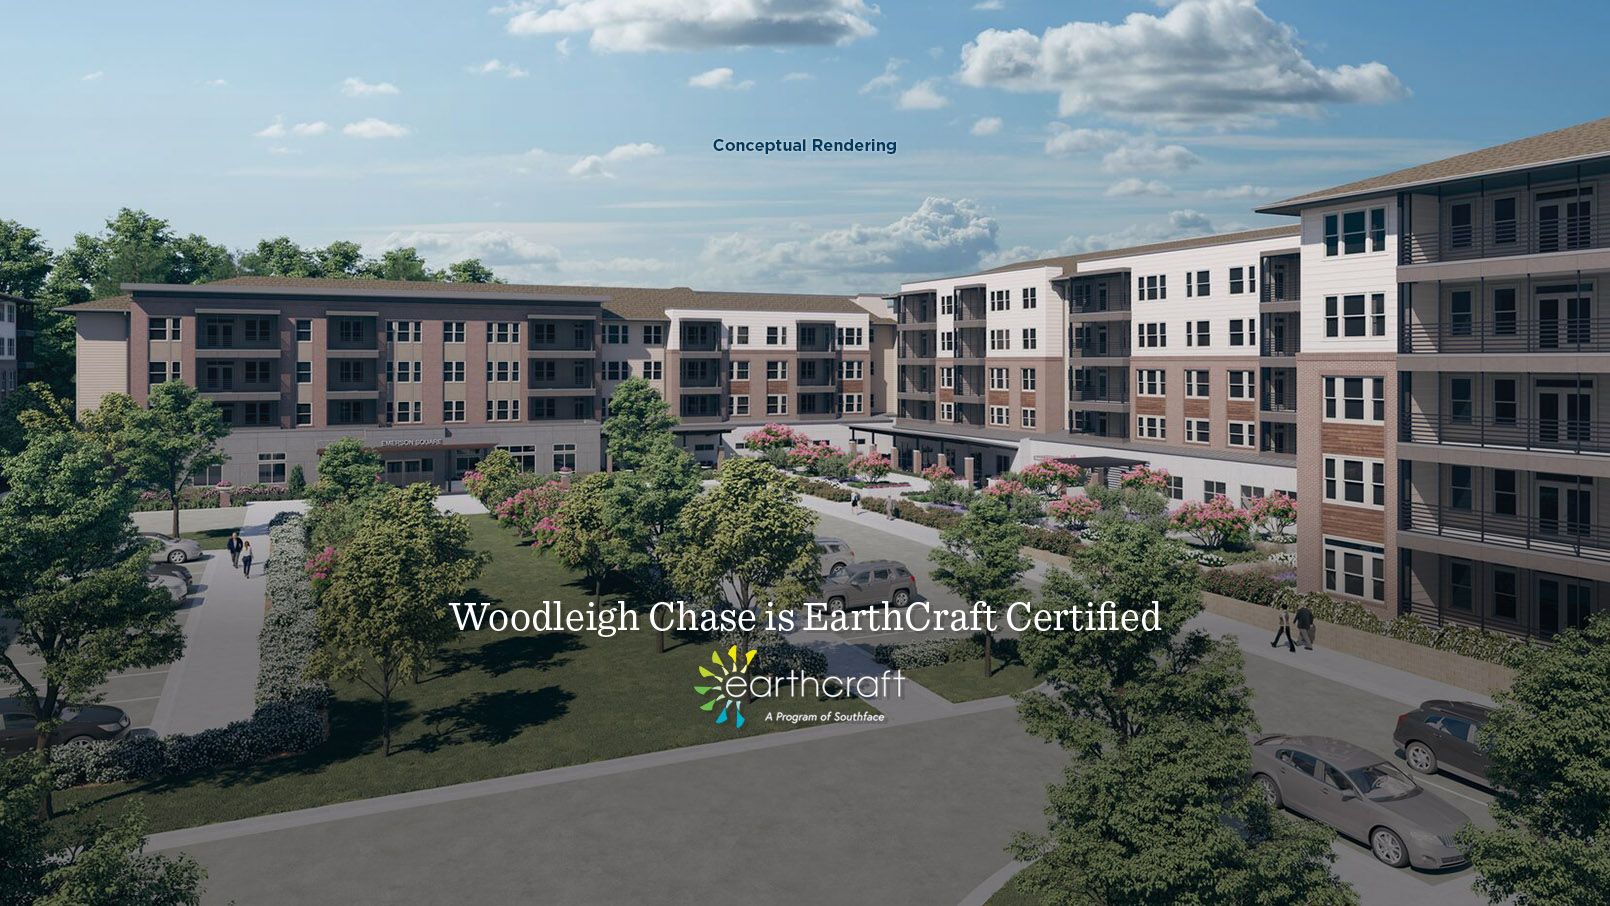 Conceptual rendering of several Woodleigh Chase community buildings and courtyard with the words Woodleigh Chase is EarthCraft certified.